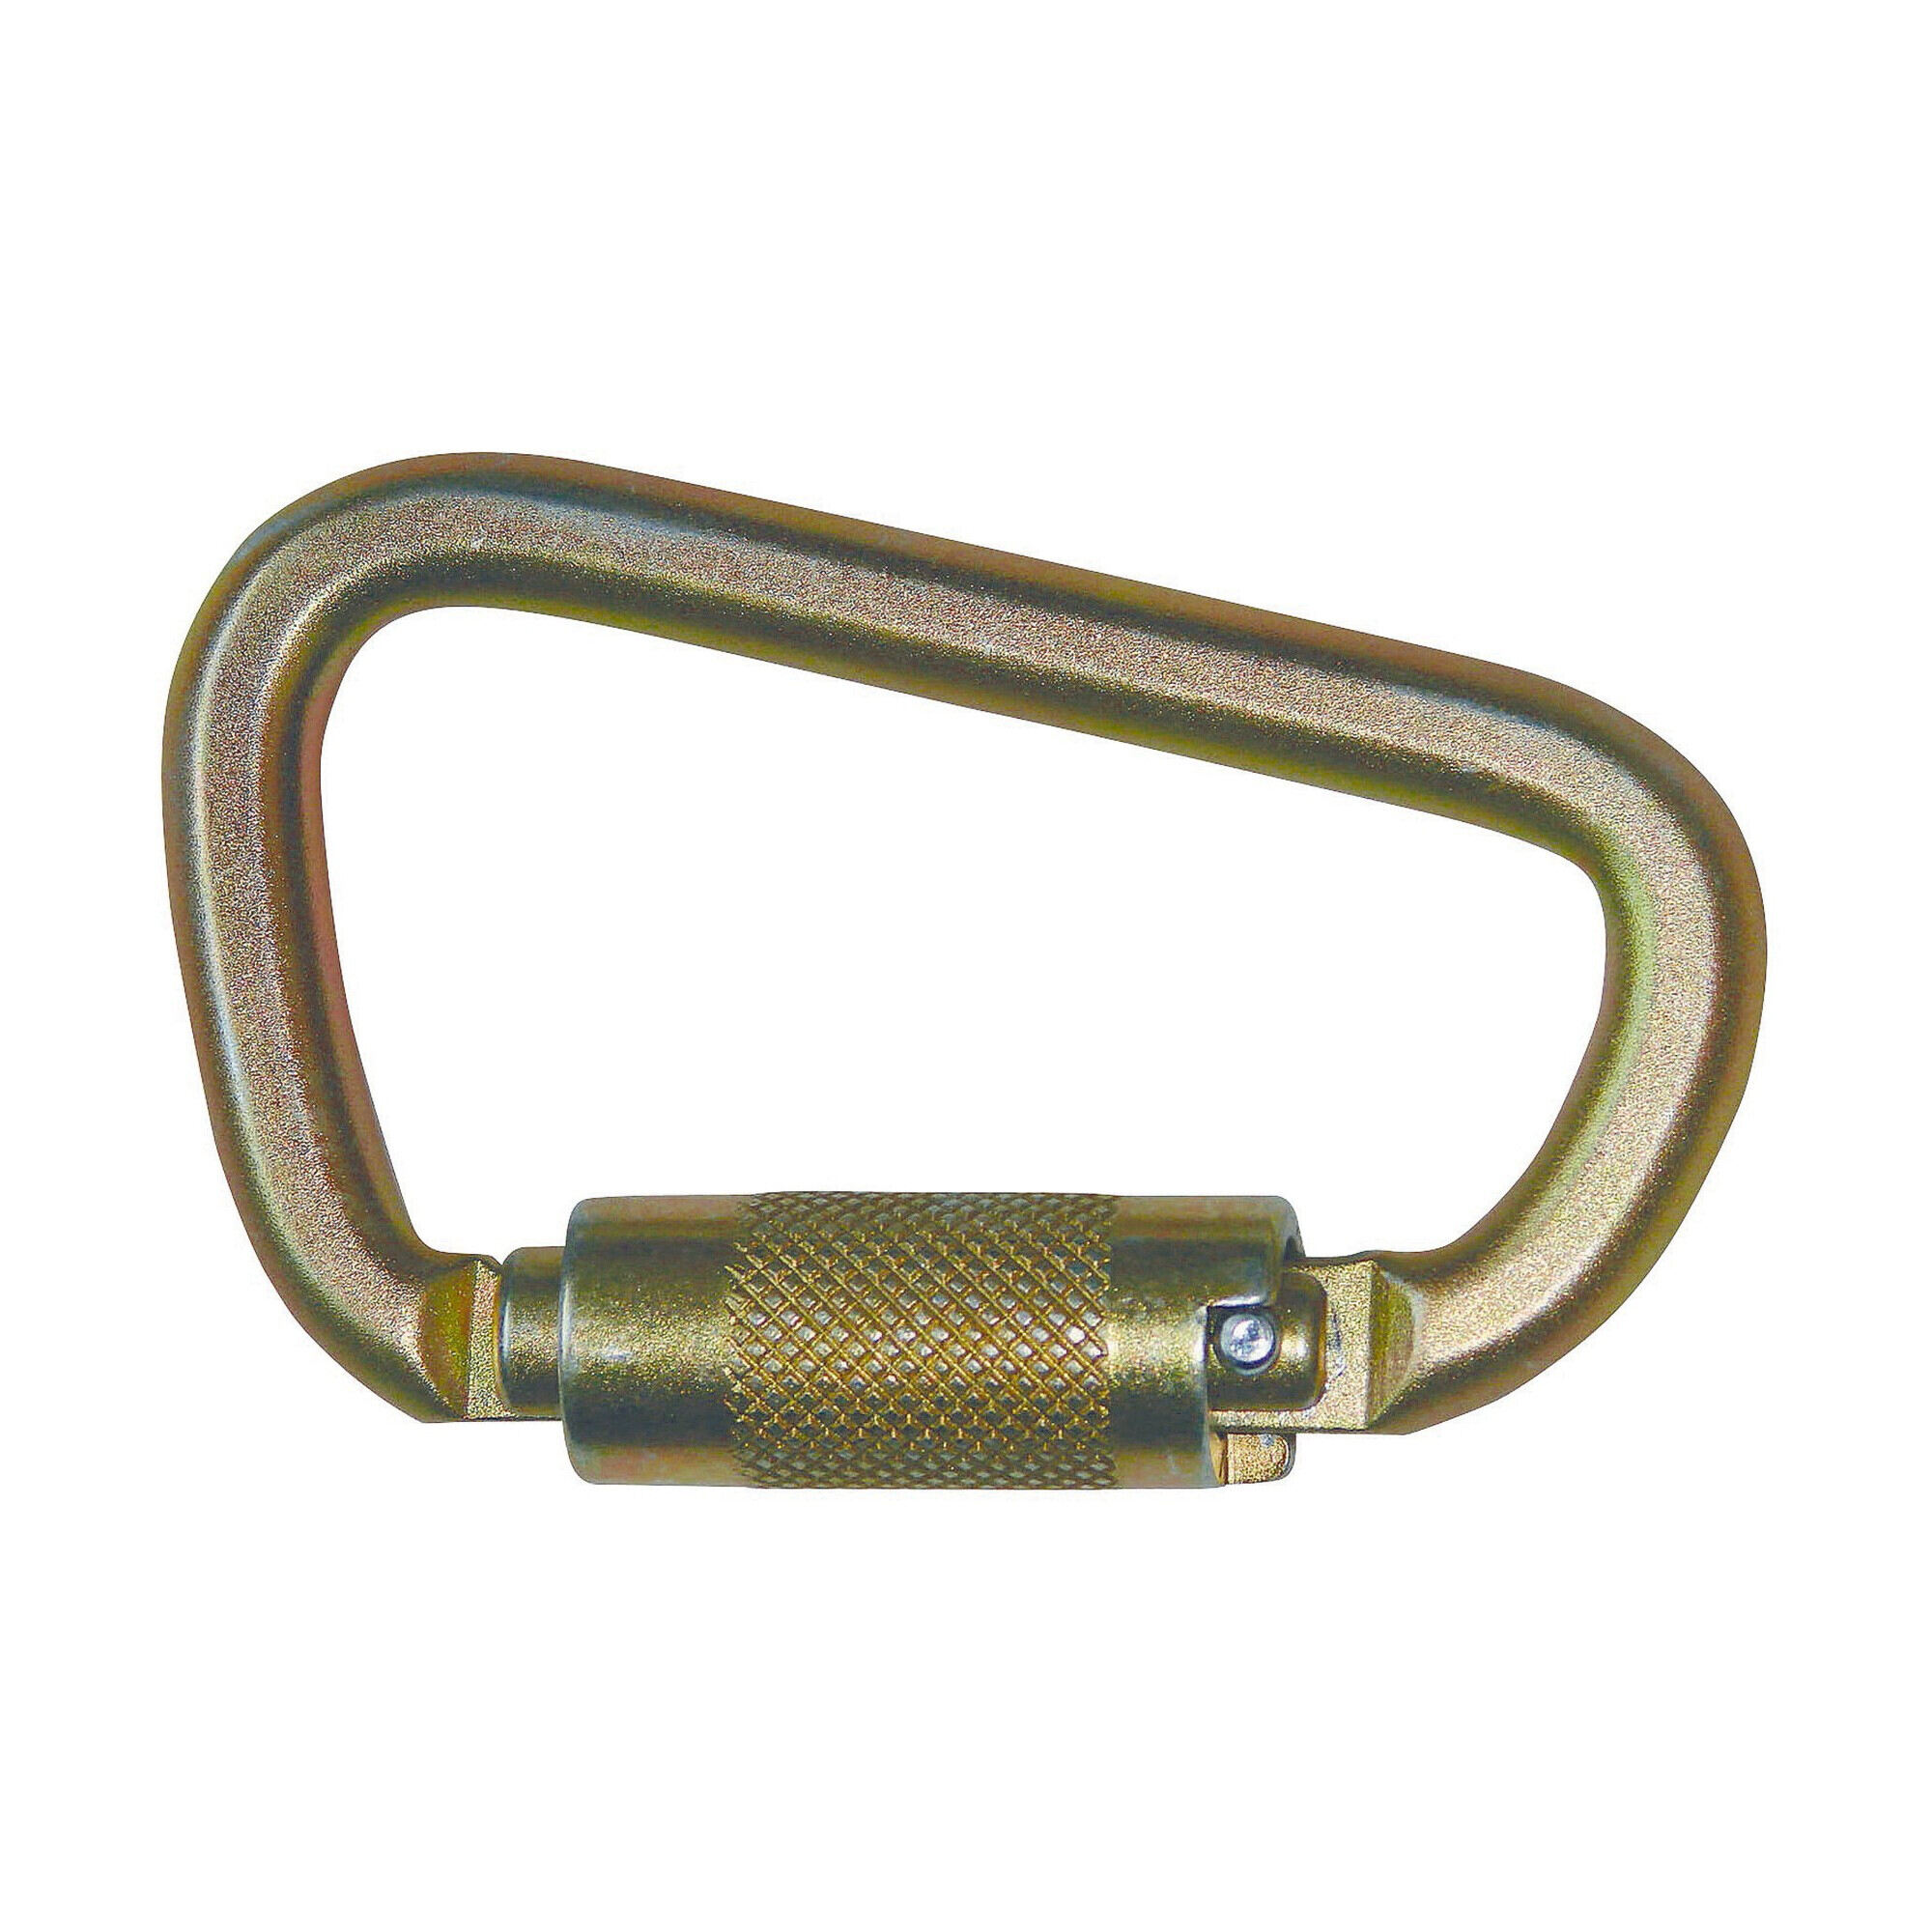 FallTech (8445) Small Carabiner, 3600 lb Load, 7/8 Gate Clearance, Alloy  Steel